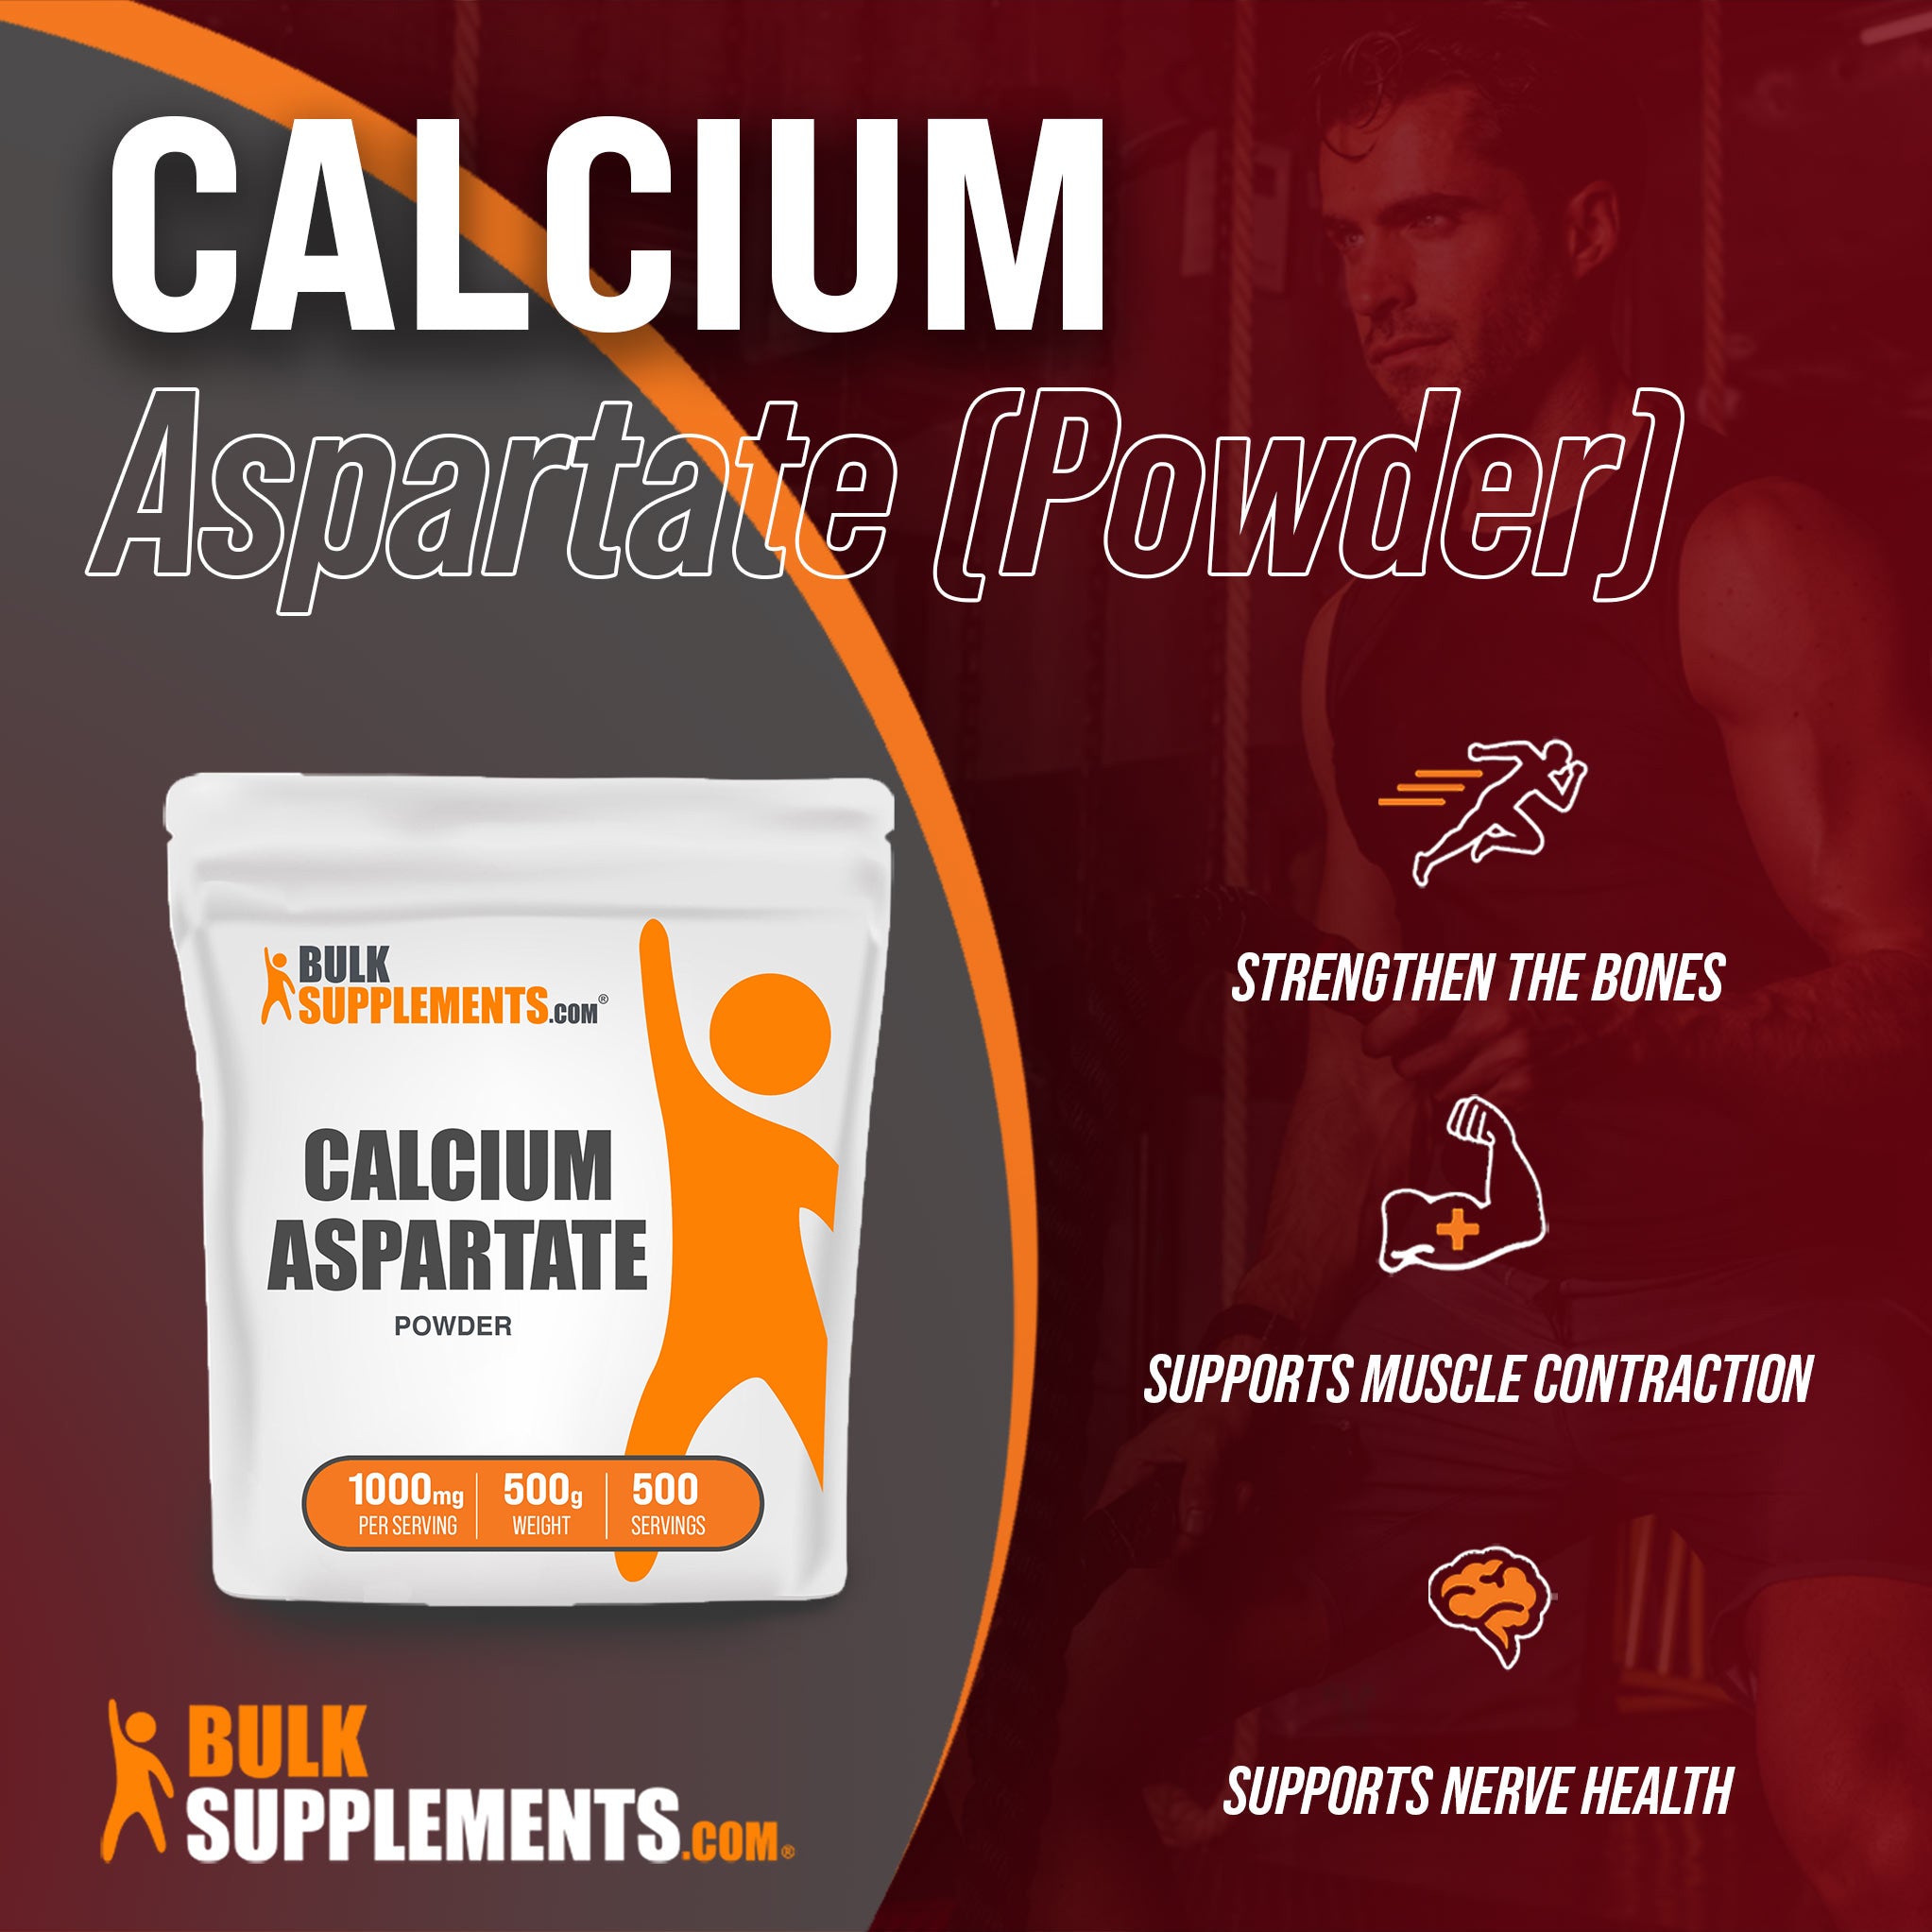 Benefits of Calcium Aspartate Powder; strengthen the bones, supports muscle contraction, supports nerve health